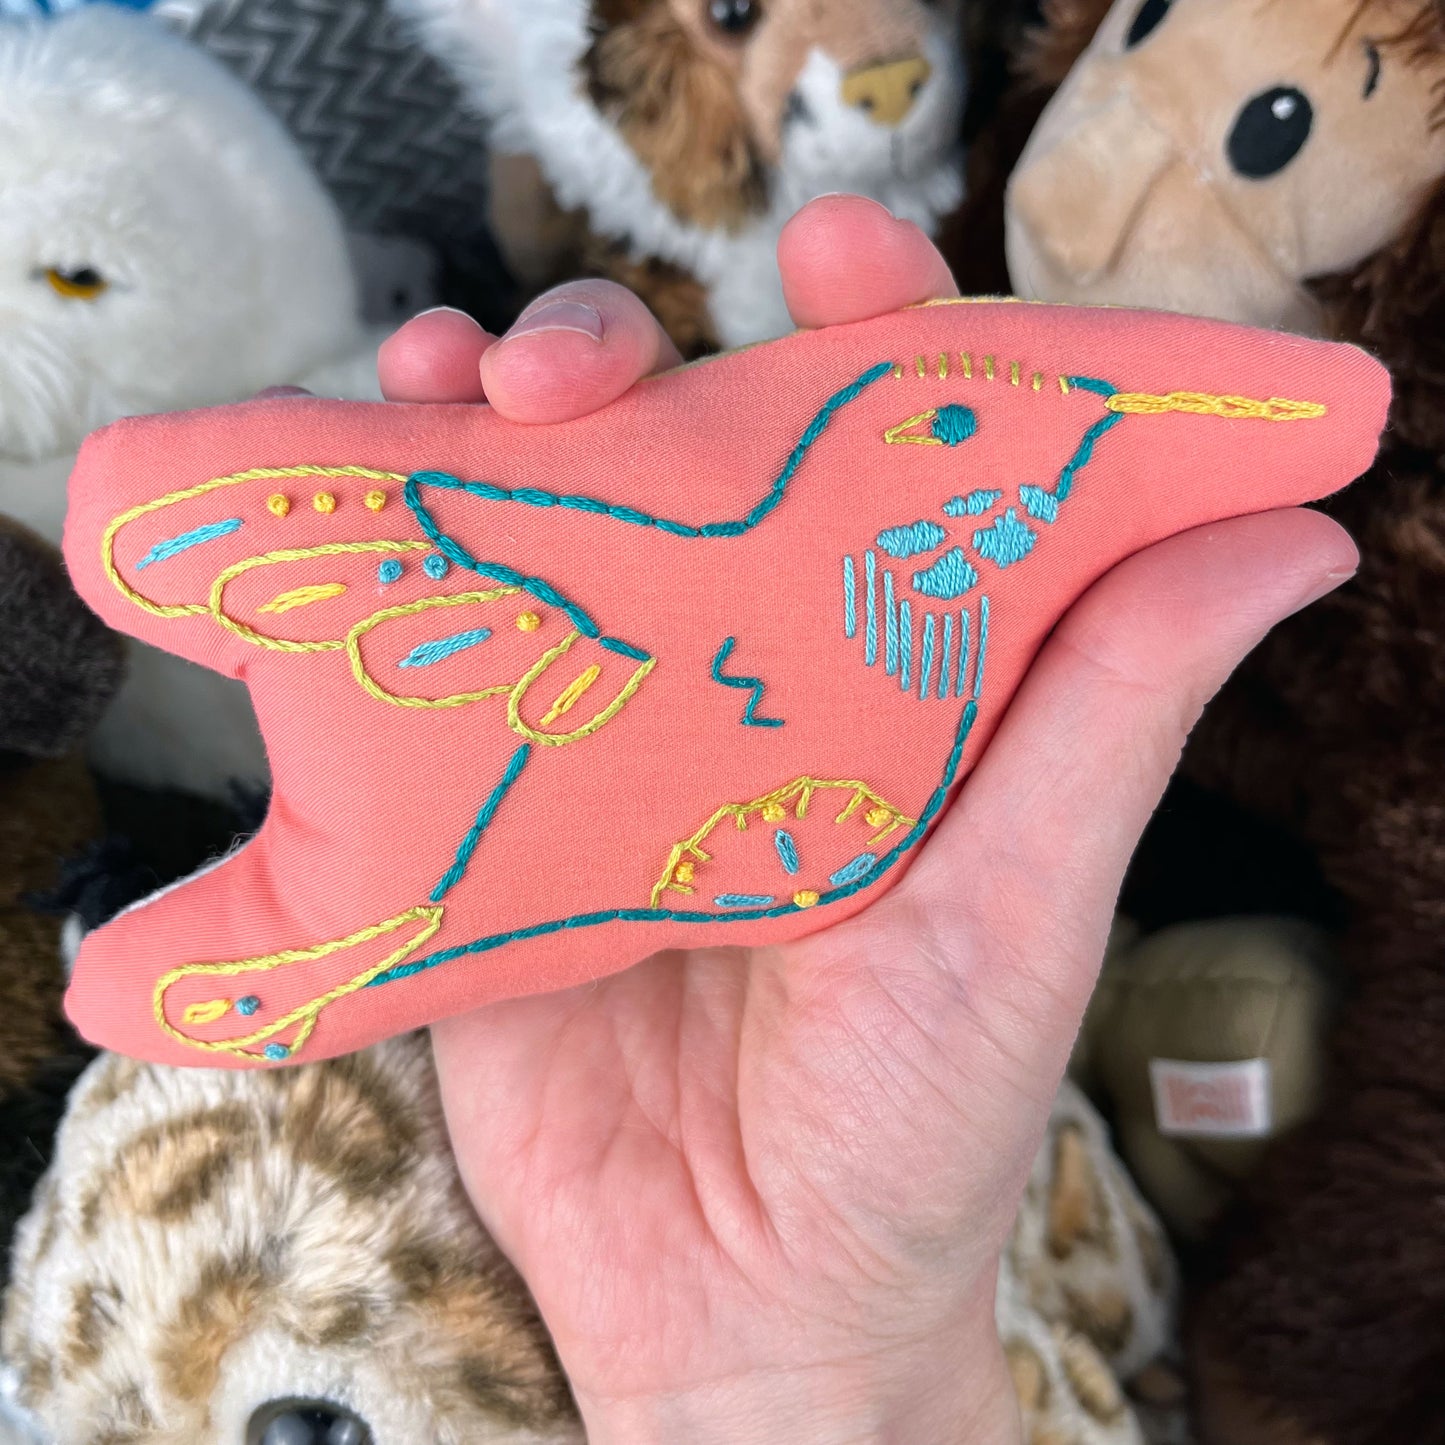 a hand holding a colorfully hand embroidered coral hummingbird, with other stuffed animals in the background